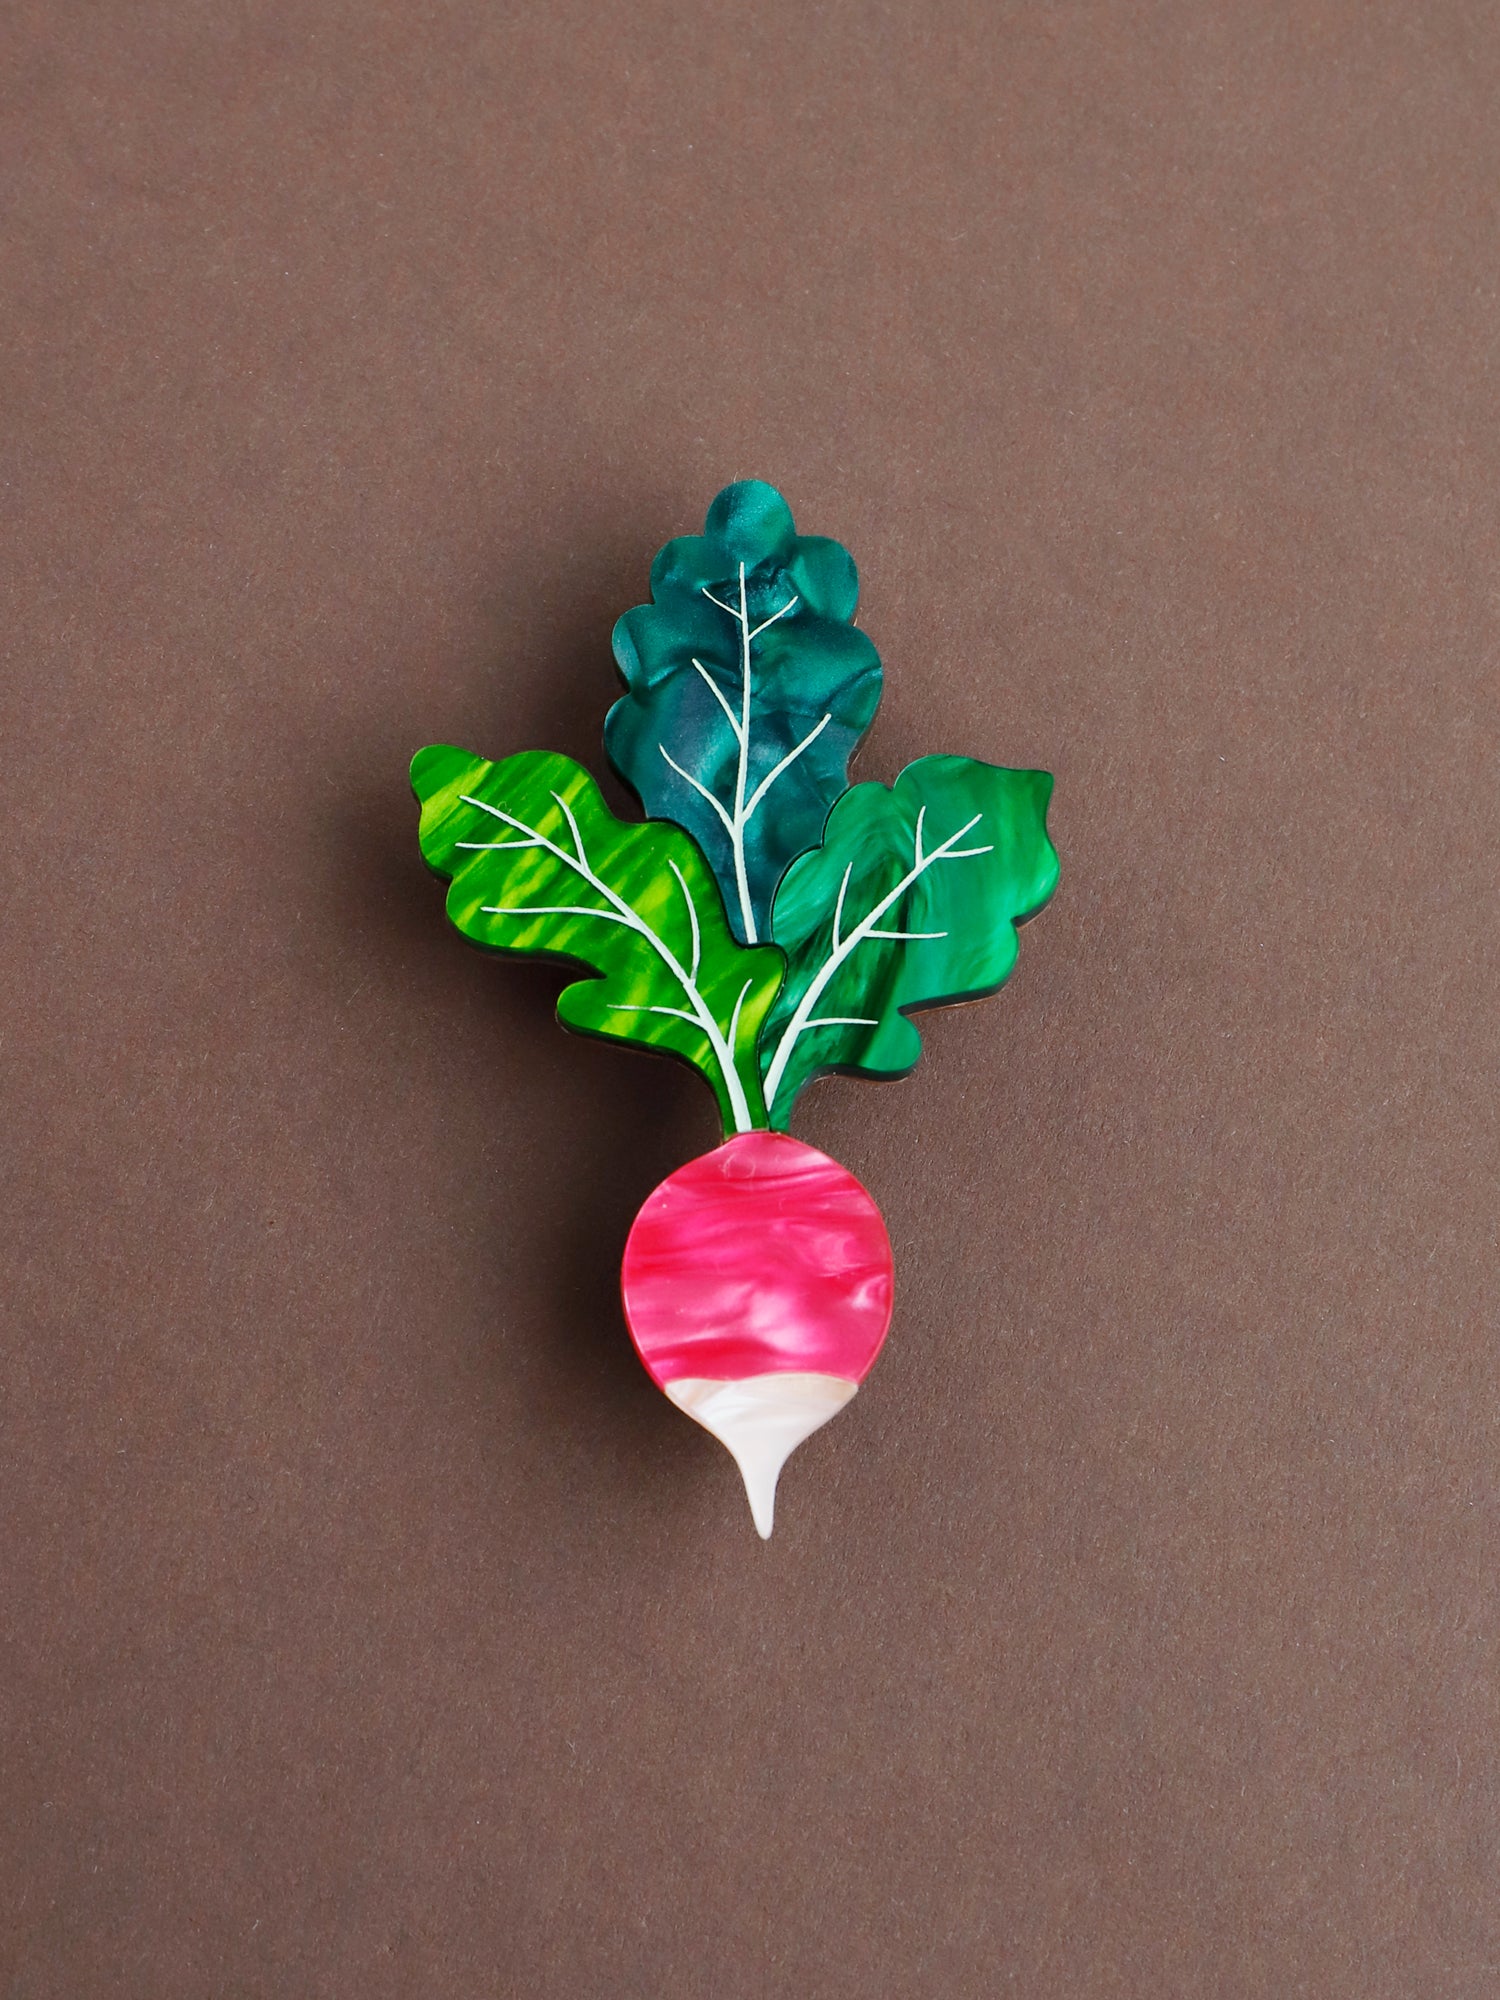 Pink and green statement acrylic radish brooch. Handmade in London by Wolf & Moon.